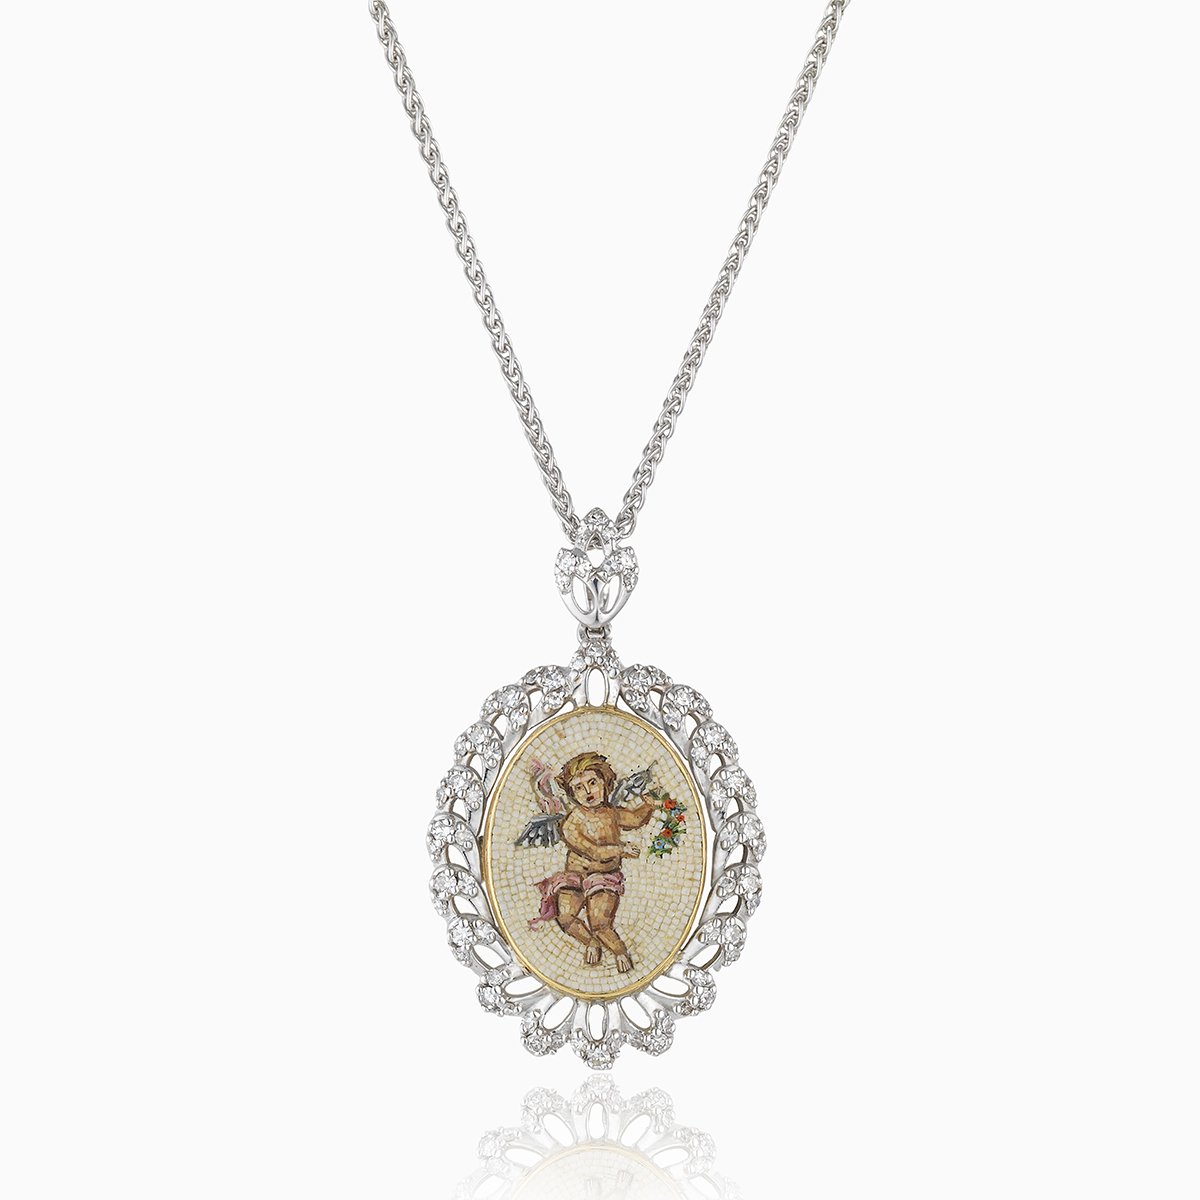 18 ct white gold locket with a micromosaic desing of a cherub with a rope twist surround set with diamonds. The bail is also set with diamonds. On an 18 ct white gold spiga chain.